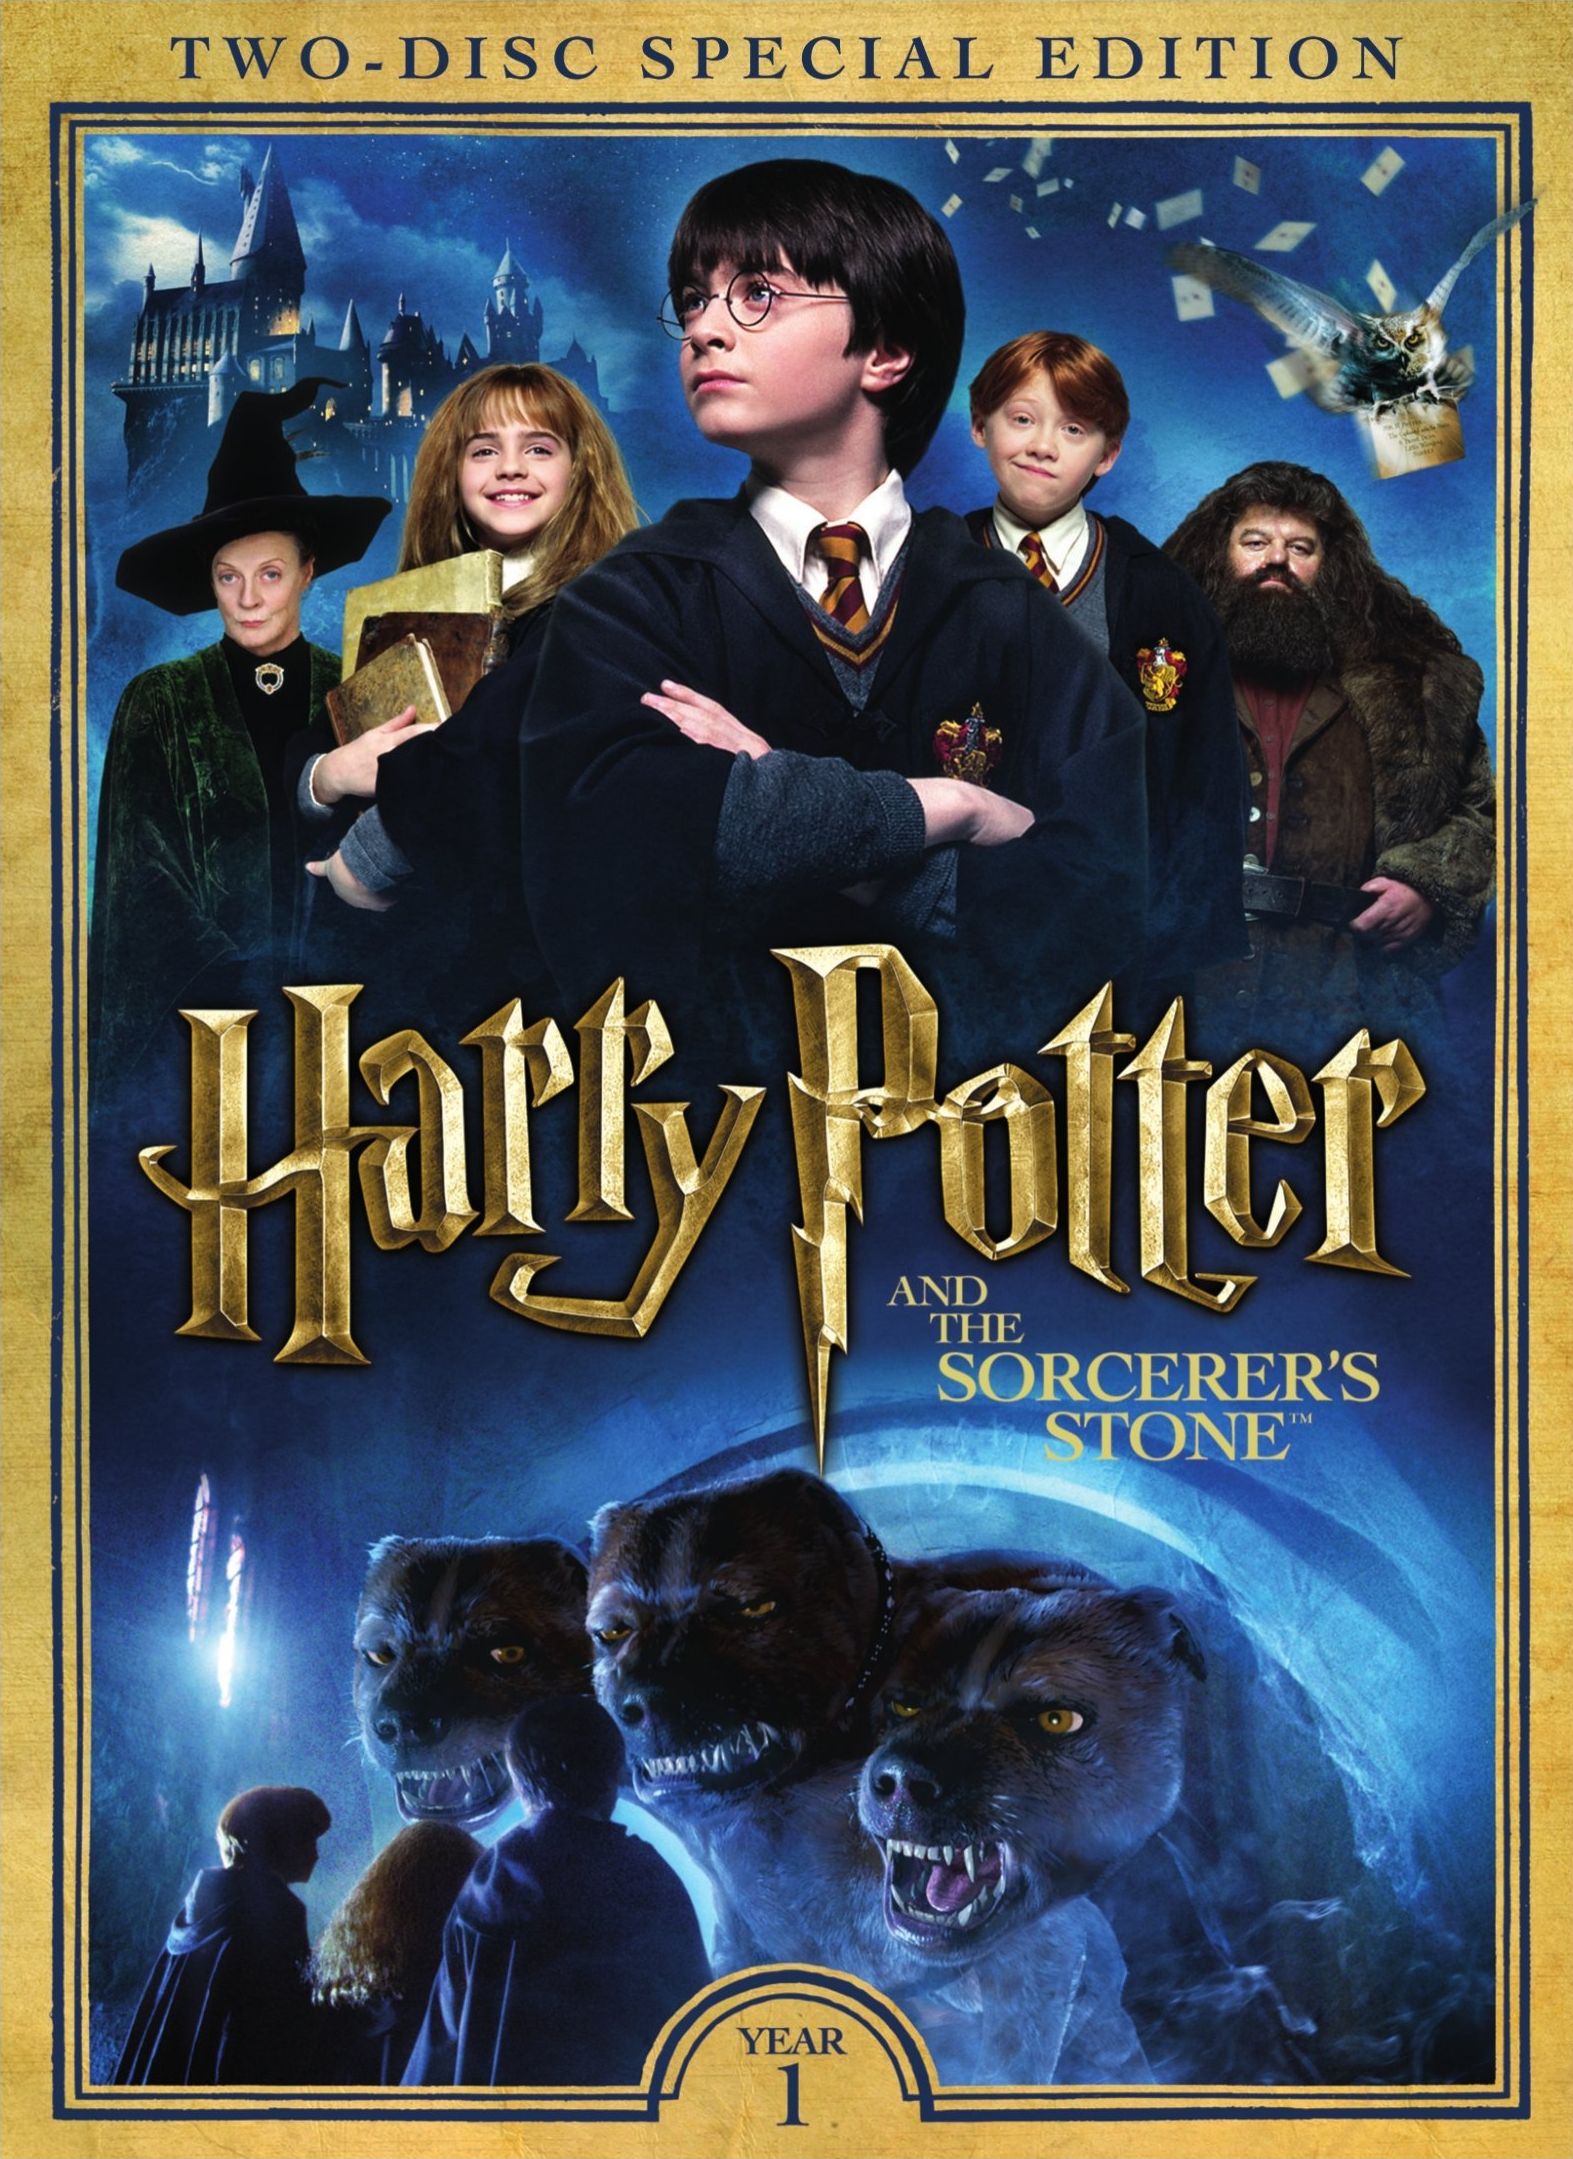 Harry Potter and the Sorcerer's Stone DVD Release Date - Harry Potter And The Sorcerer's Stone